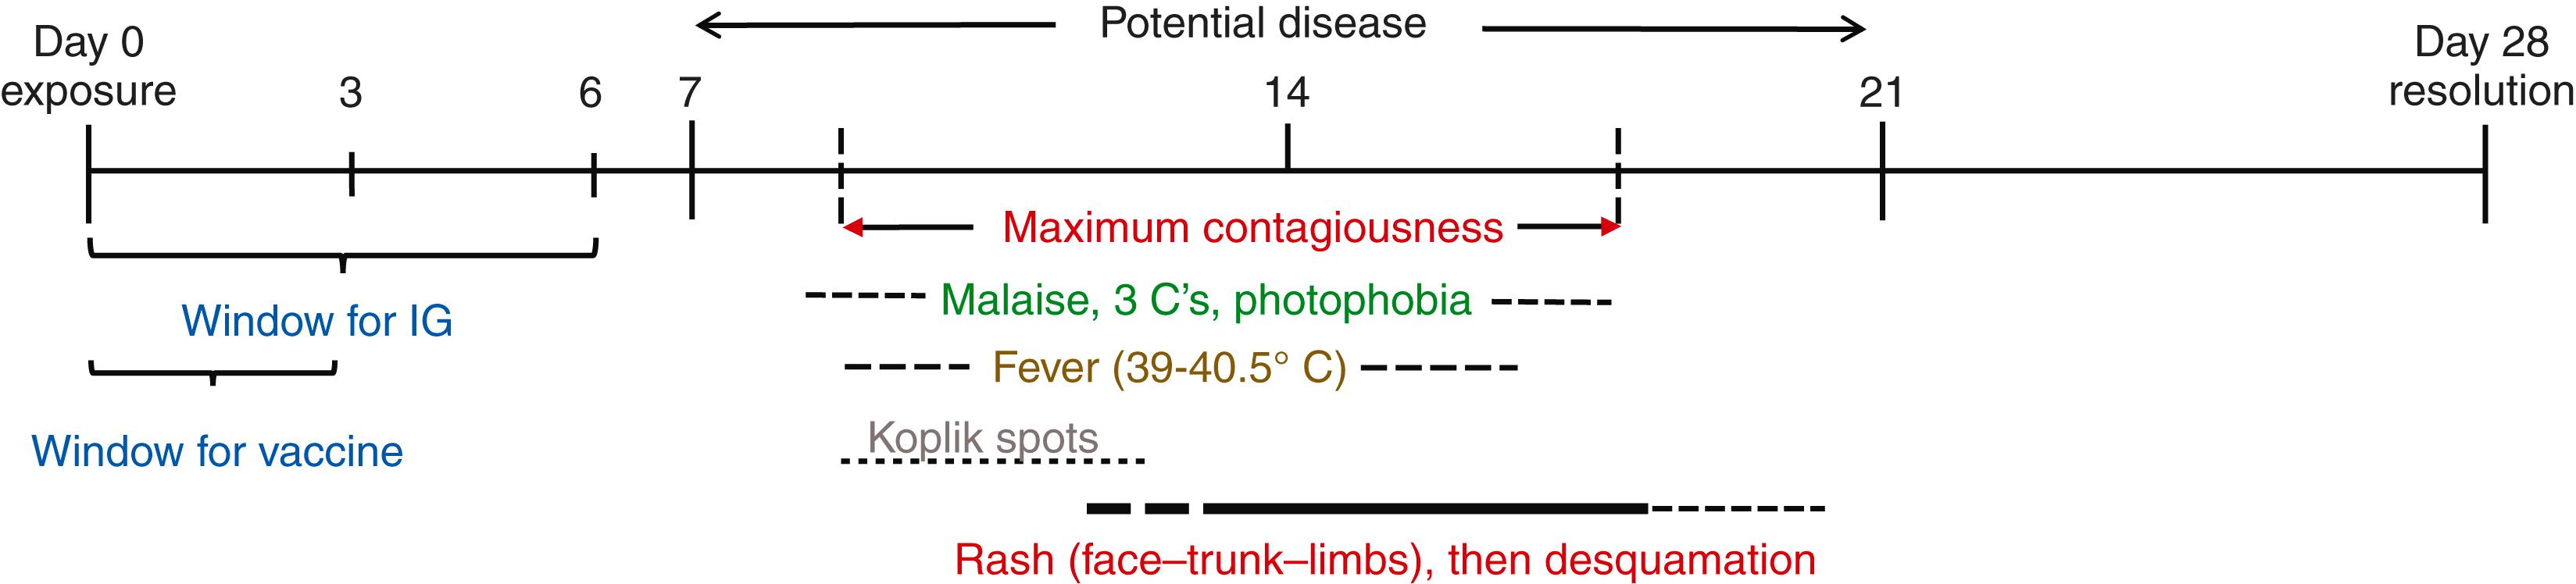 FIGURE 338-1, Clinical progression of measles.